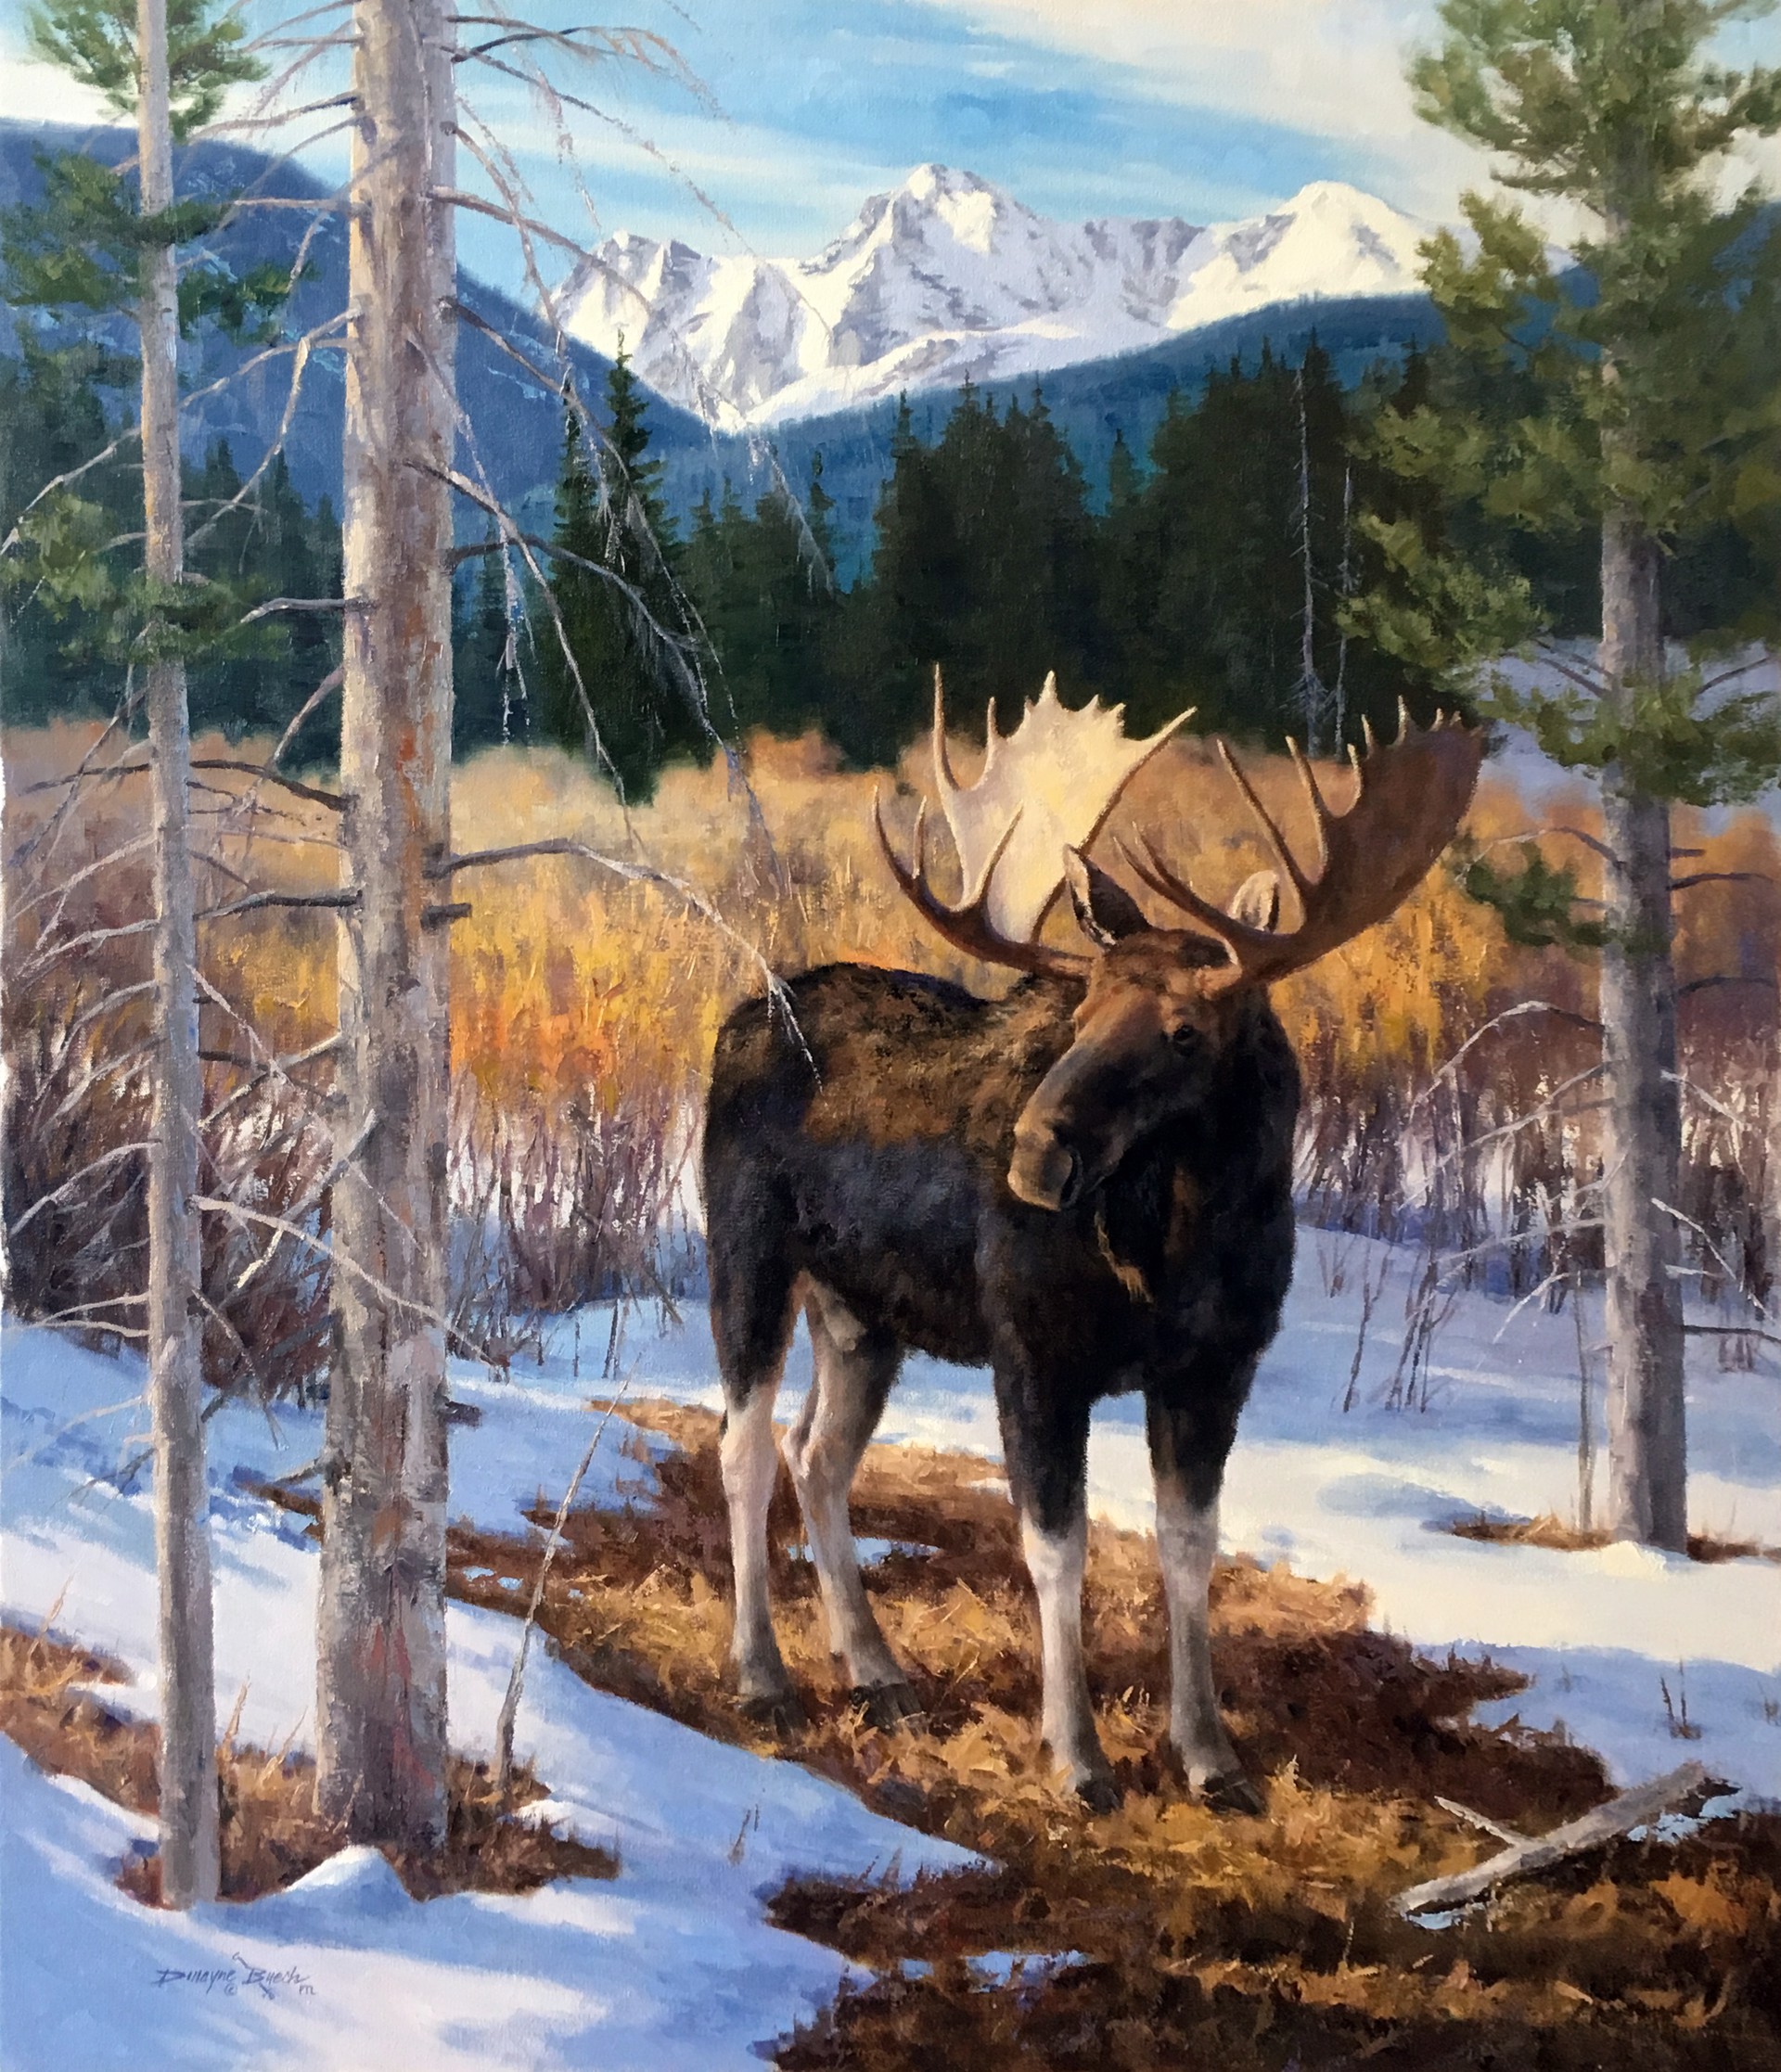 Among the Willows (Moose) by Dwayne Brech